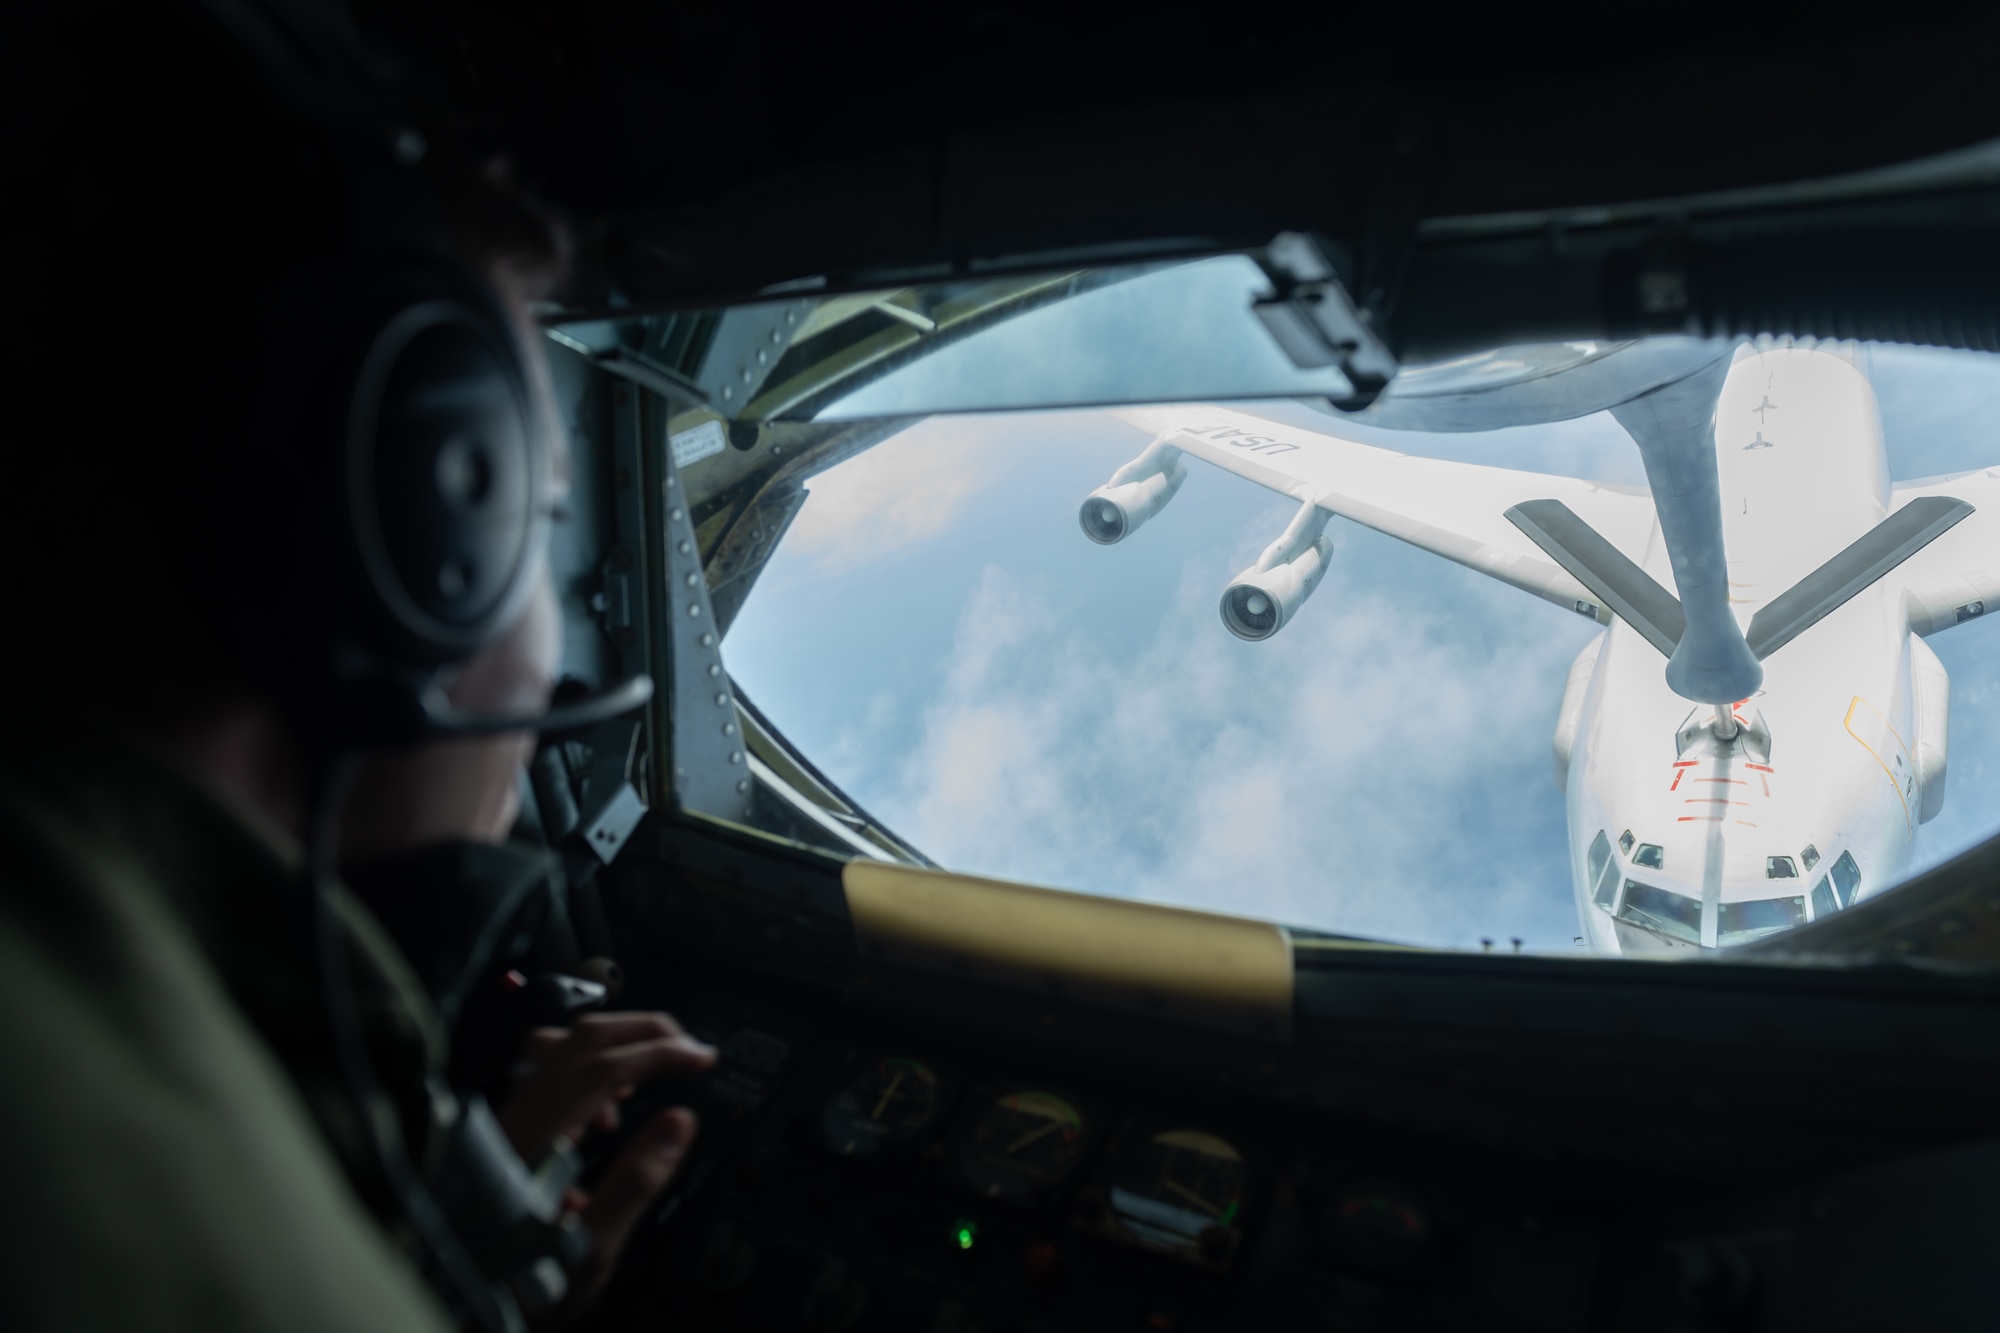 U.S. Air Force Staff Sgt. Michael Lawson, boom operator assigned to the 909th Air Refueling Squadron, refuels an E-3 Sentry, July 10, 2019, during a training exercise out of Kadena Air Base, Japan. The 909th ARS helps ensure a free and open Indo-Pacific by providing air refueling to U.S., allies and partners within the area of responsibility. (U.S. Air Force photo by Airman 1st Class Matthew Seefeldt)